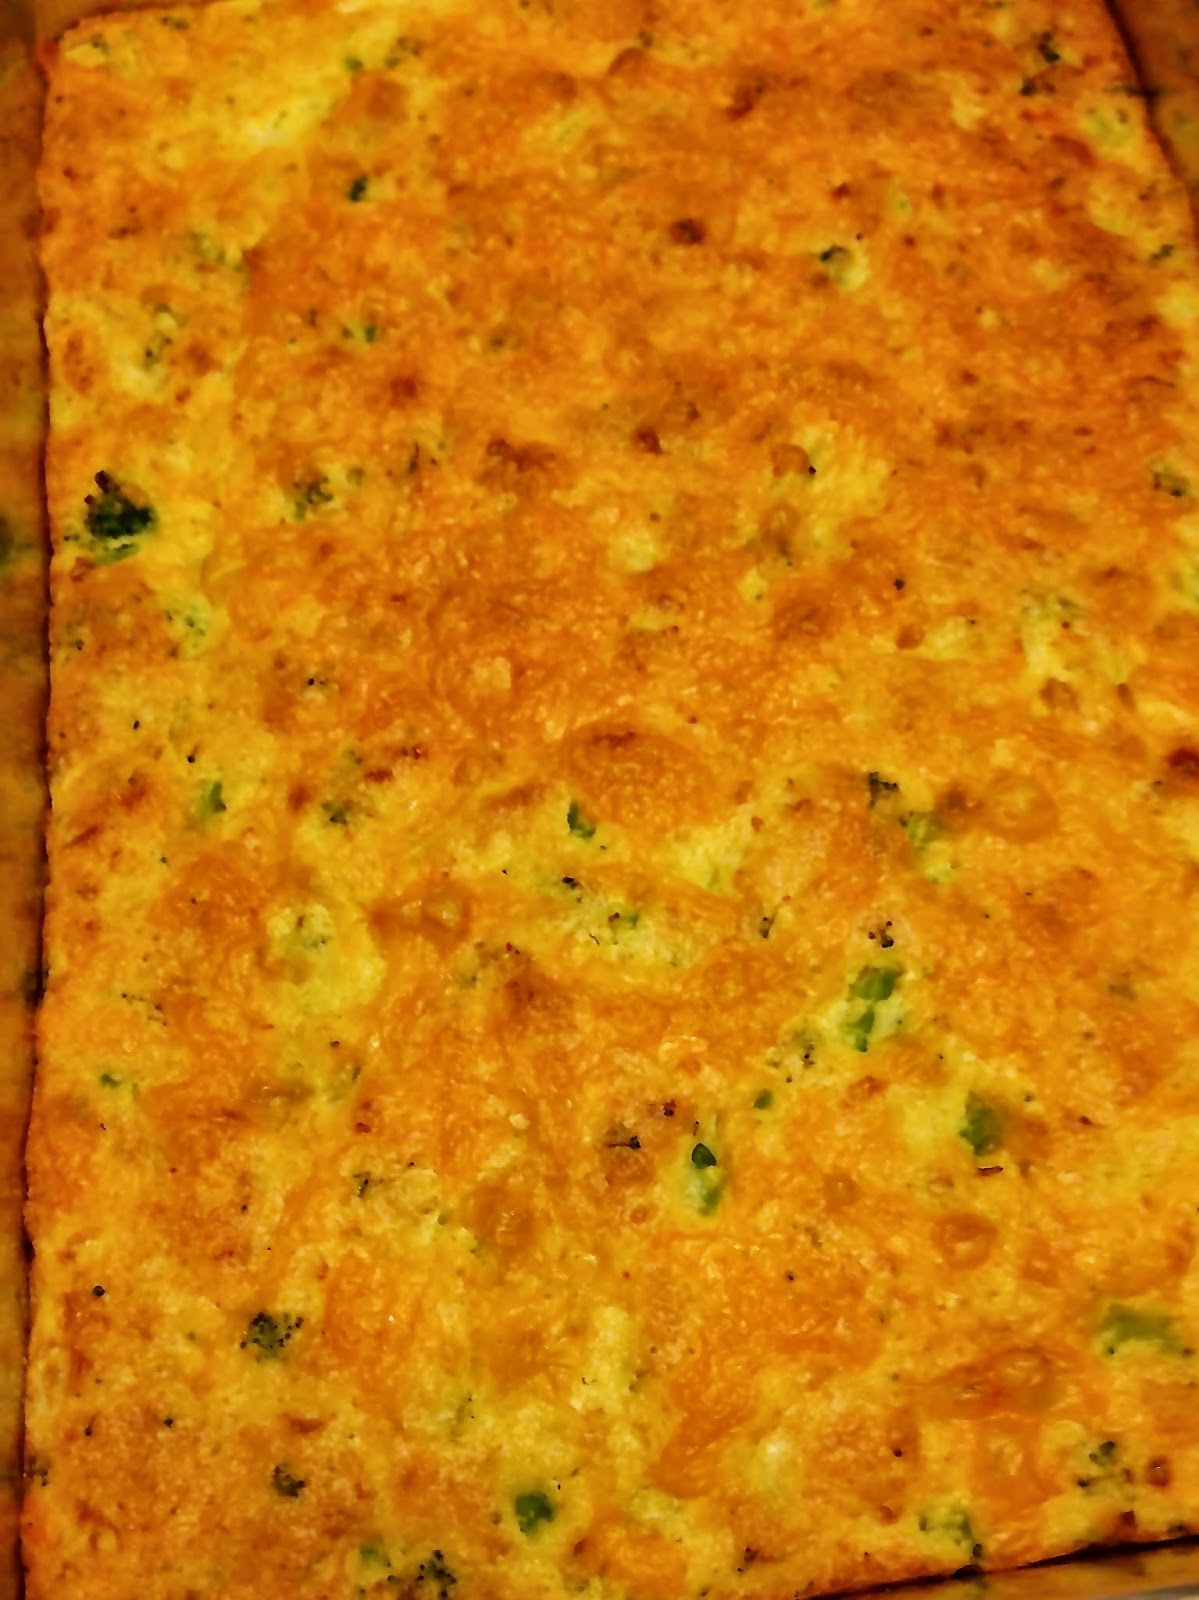 Savory Sweet and Satisfying: Broccoli Cornbread with Cheese